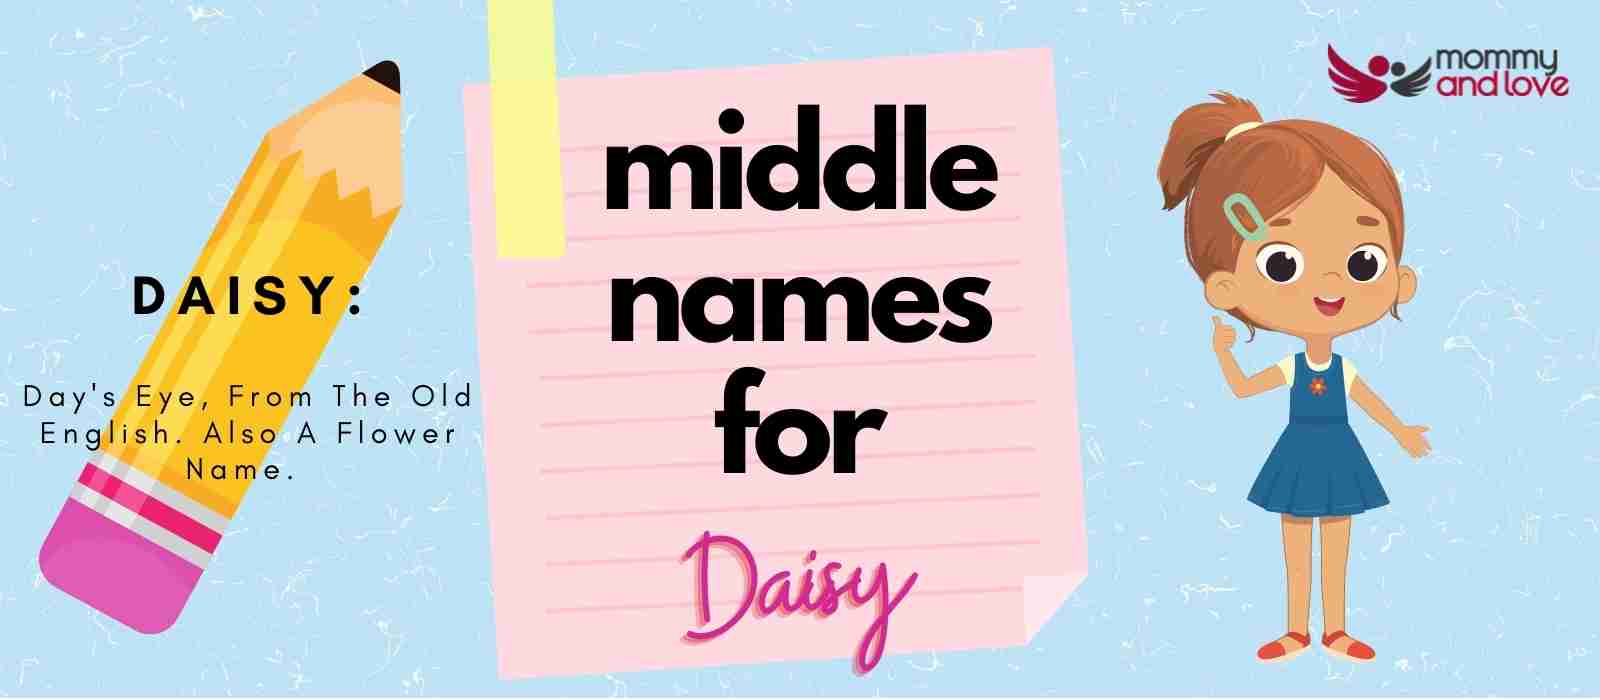 Middle Names for Daisy (1)